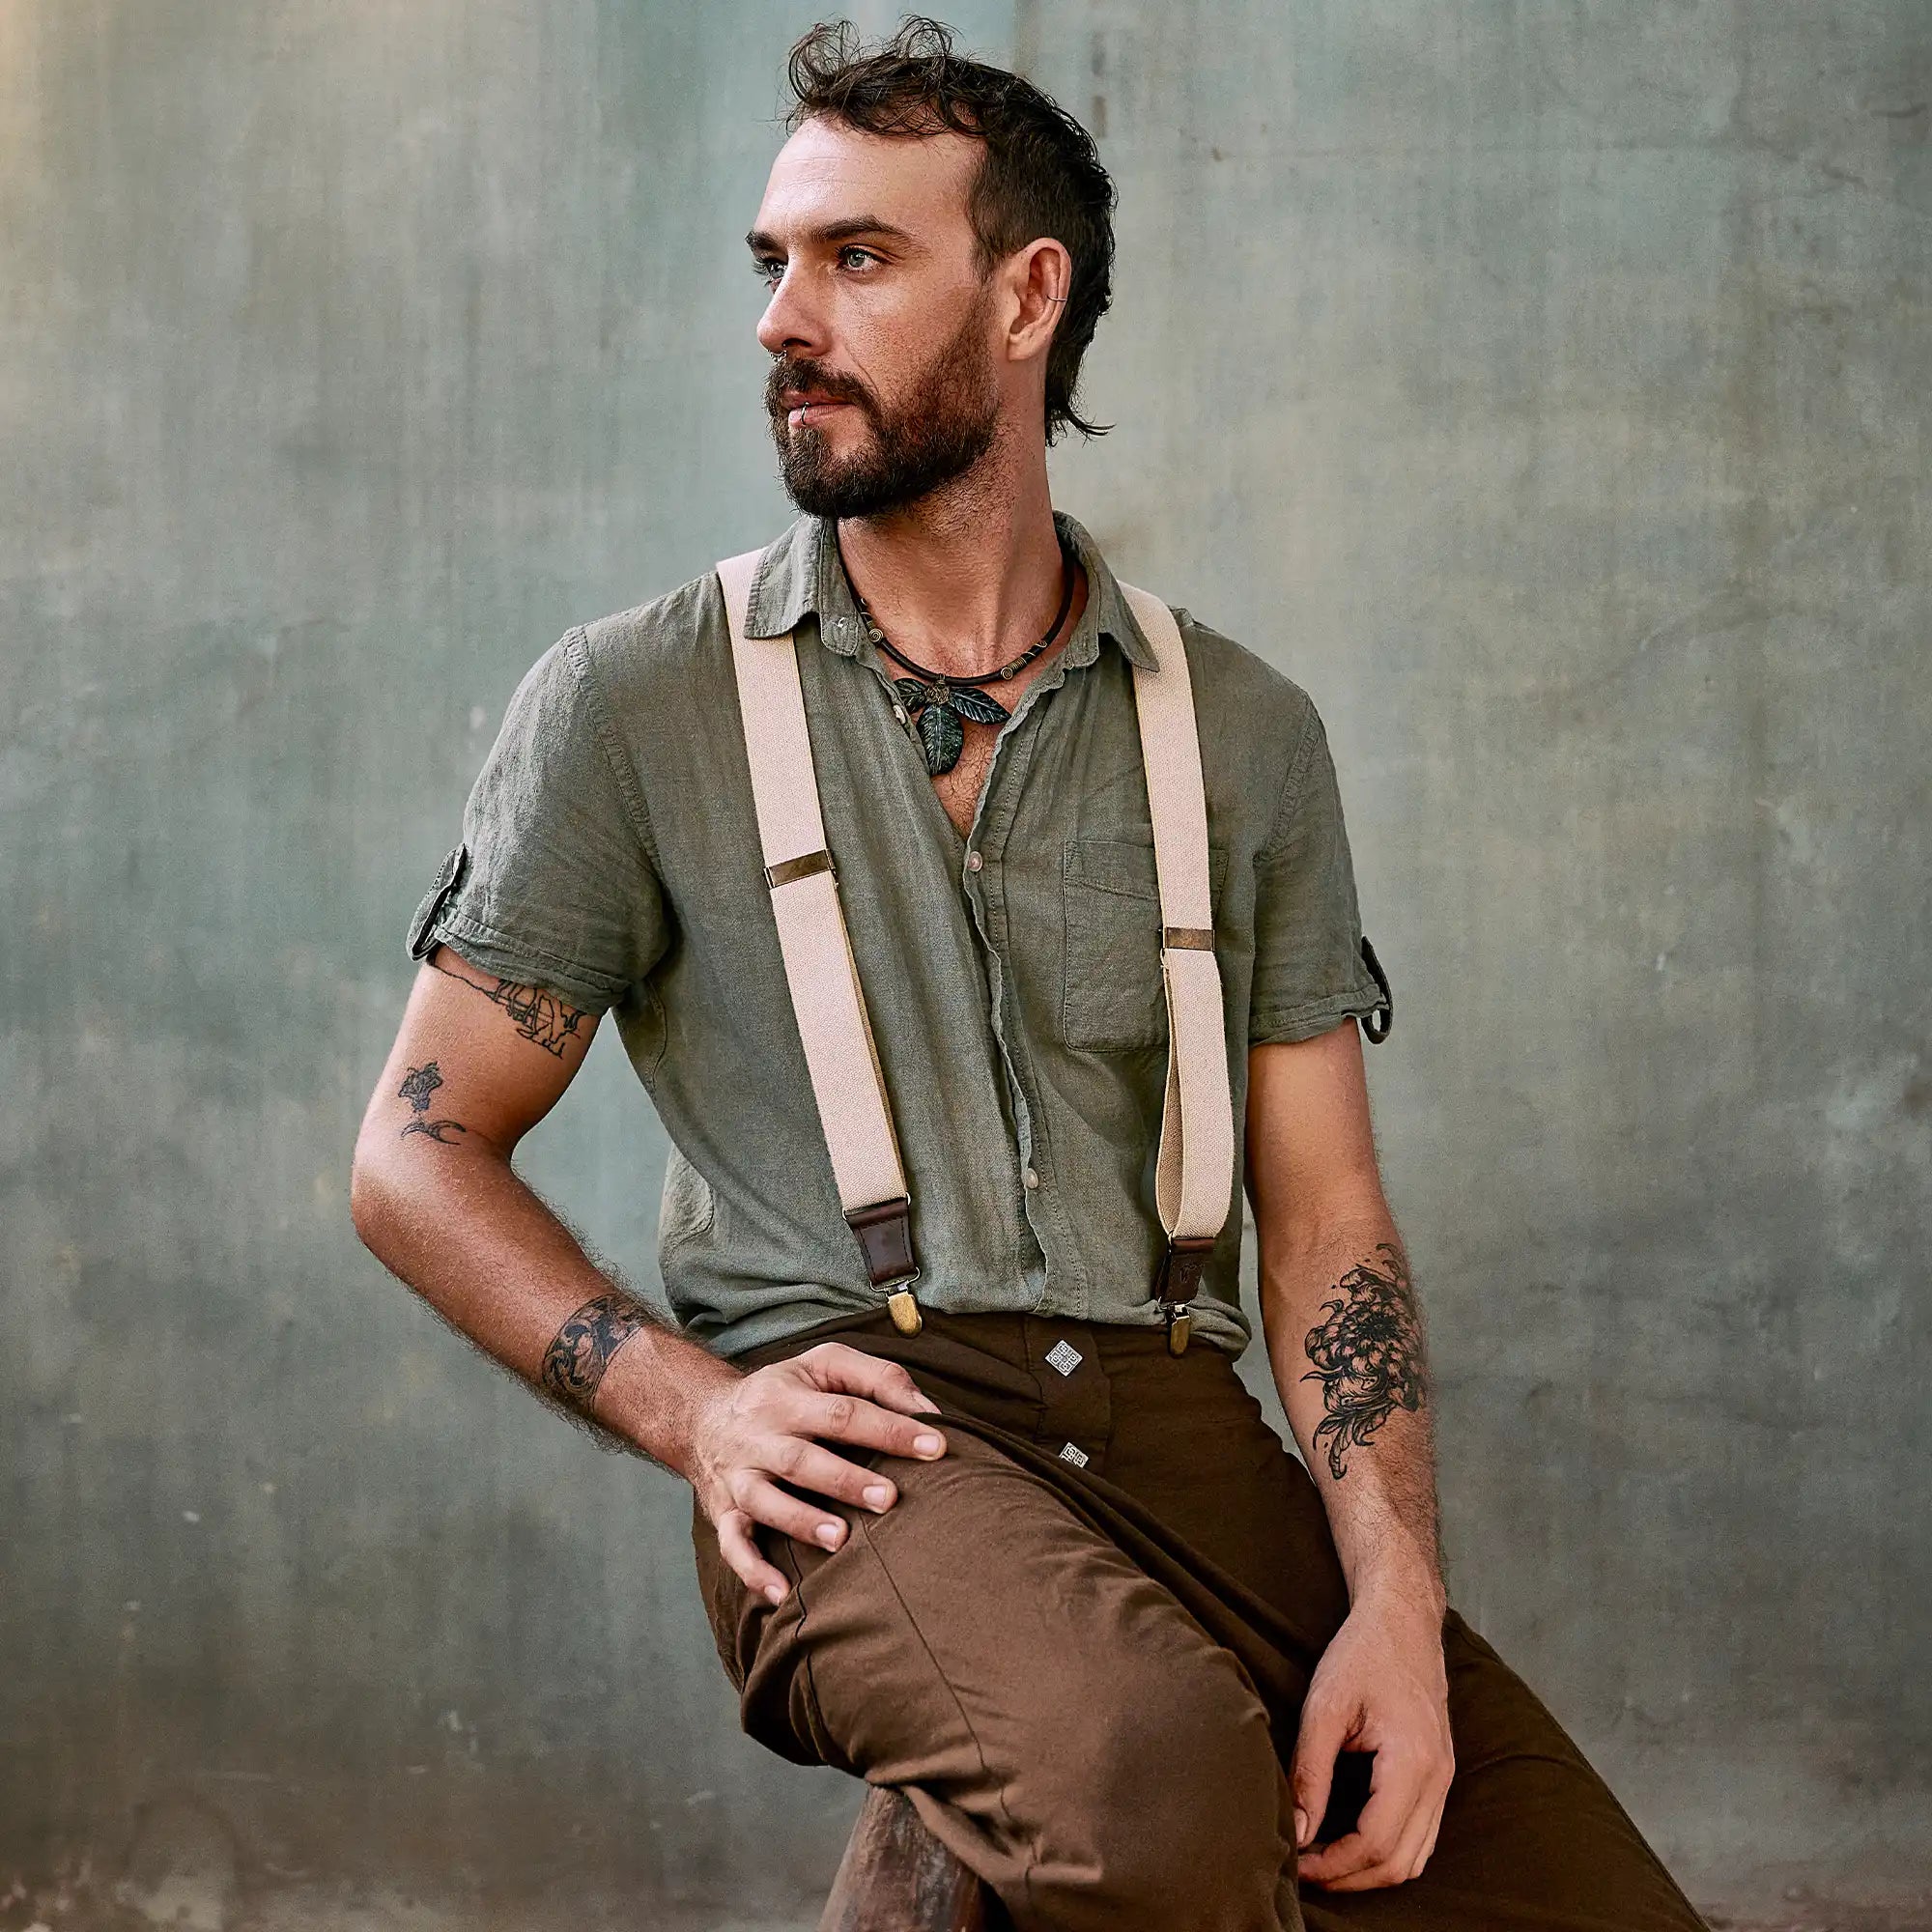 Bearded man with button shirt and Wiseguy Original Suspenders posing for photo